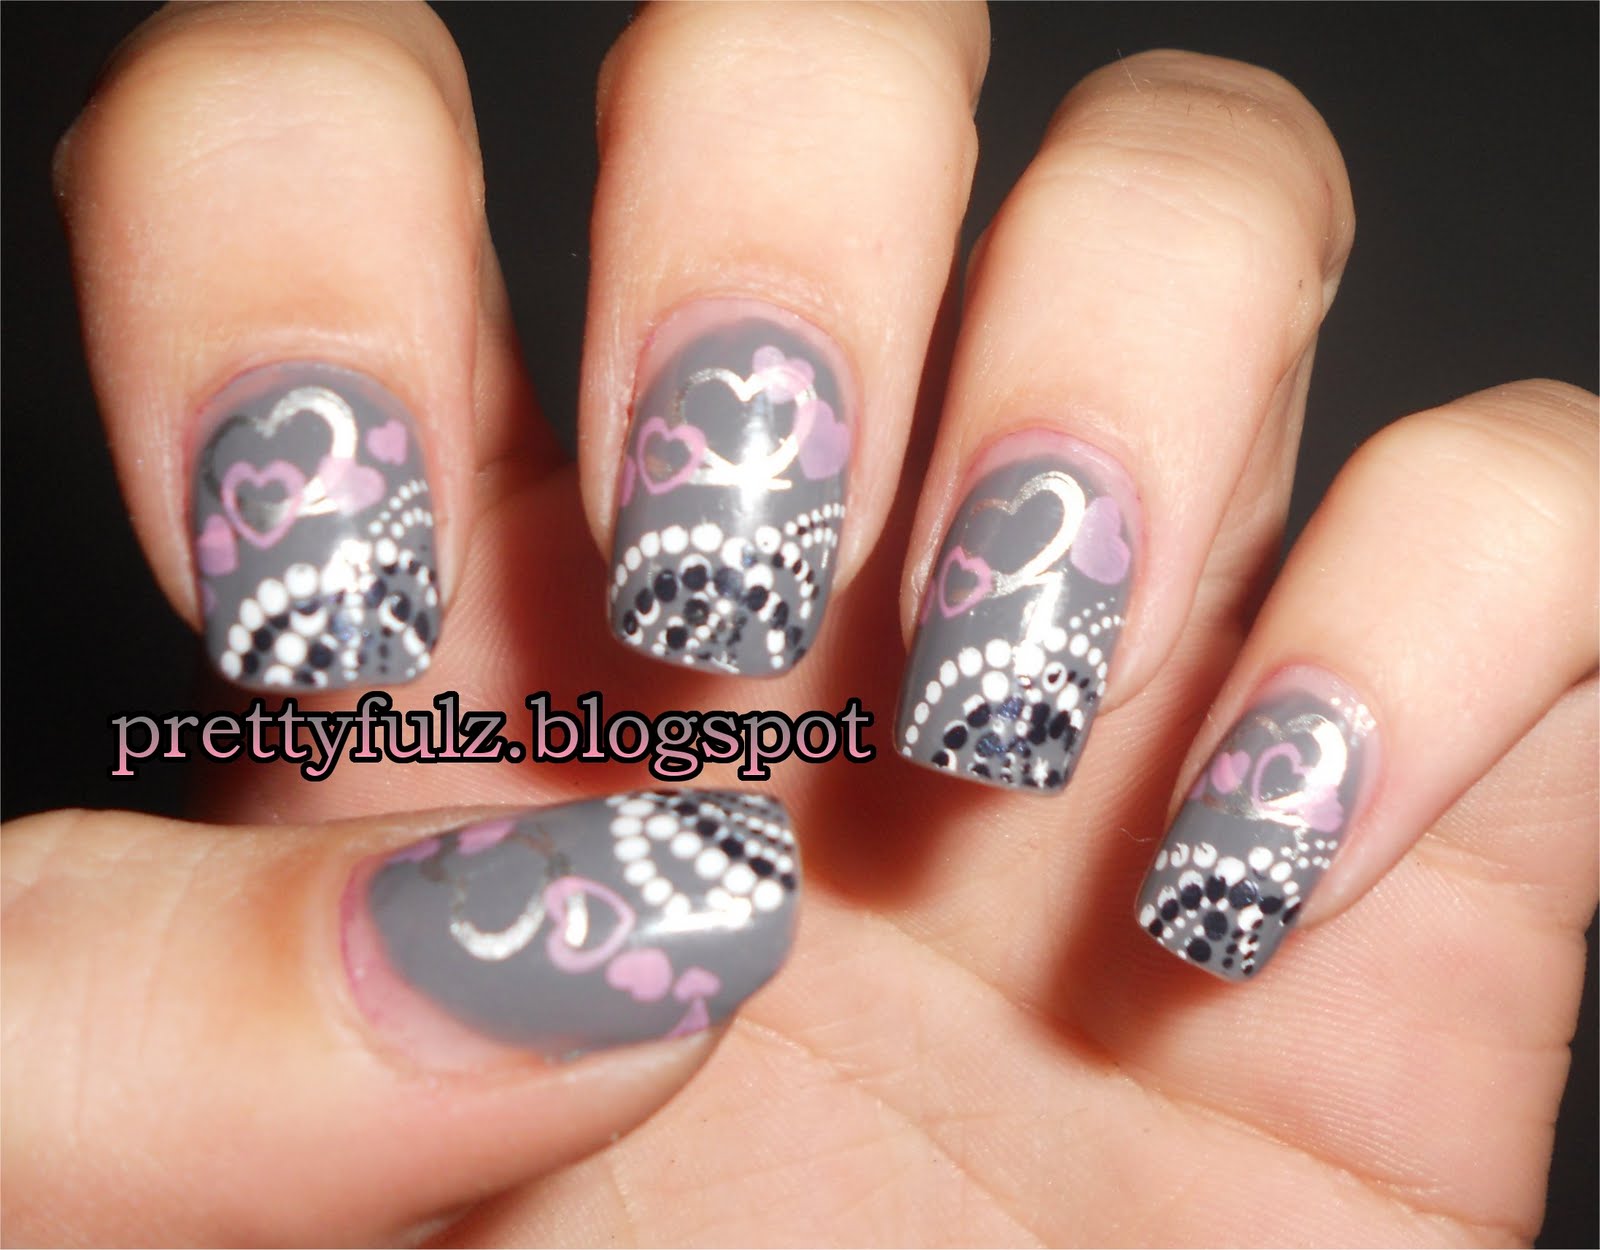 10. Nail Art Classes Philippines - wide 9